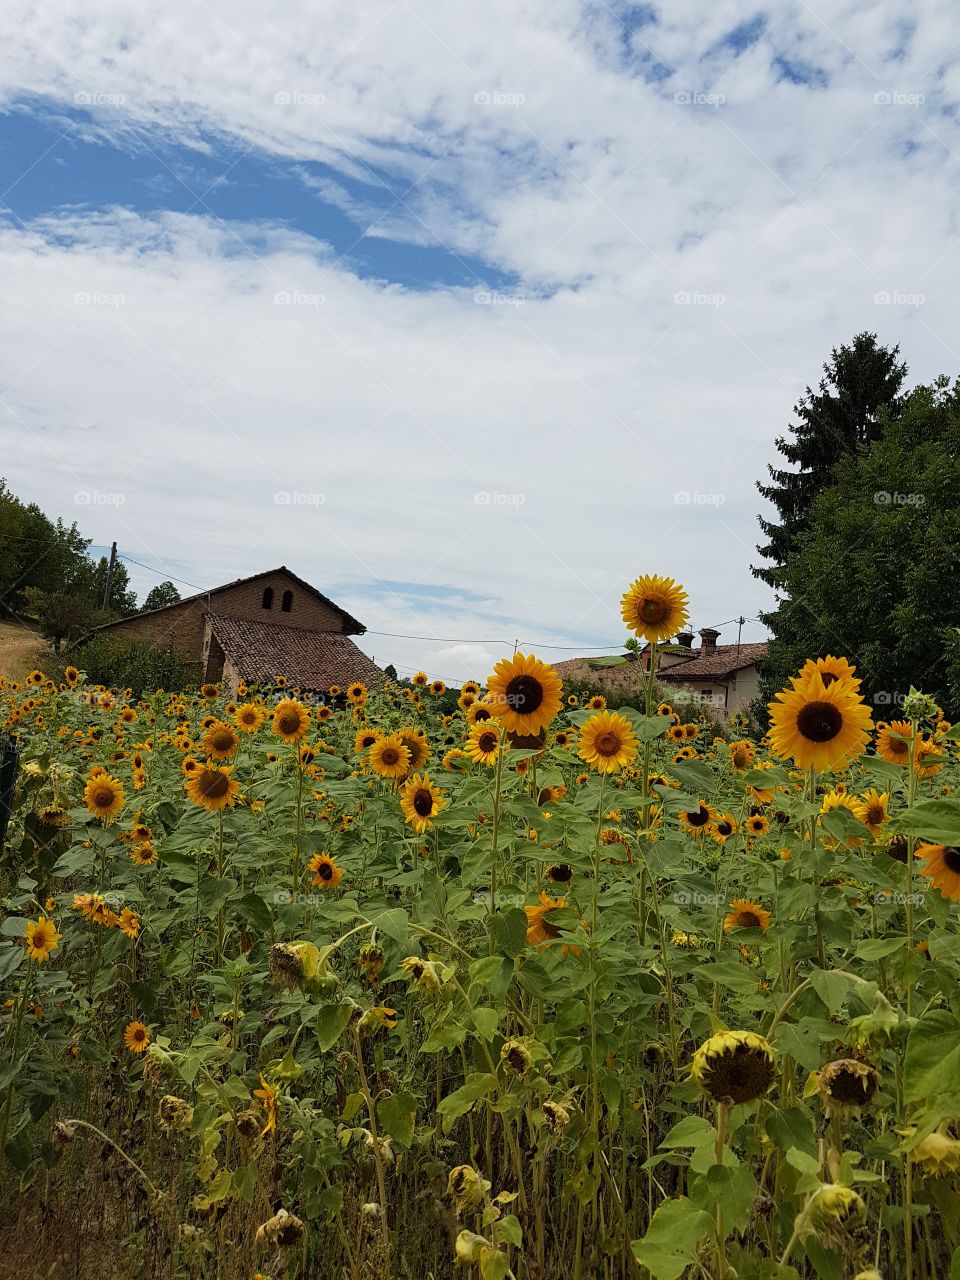 Sunflowers field and farm house in summer with cloudy sky